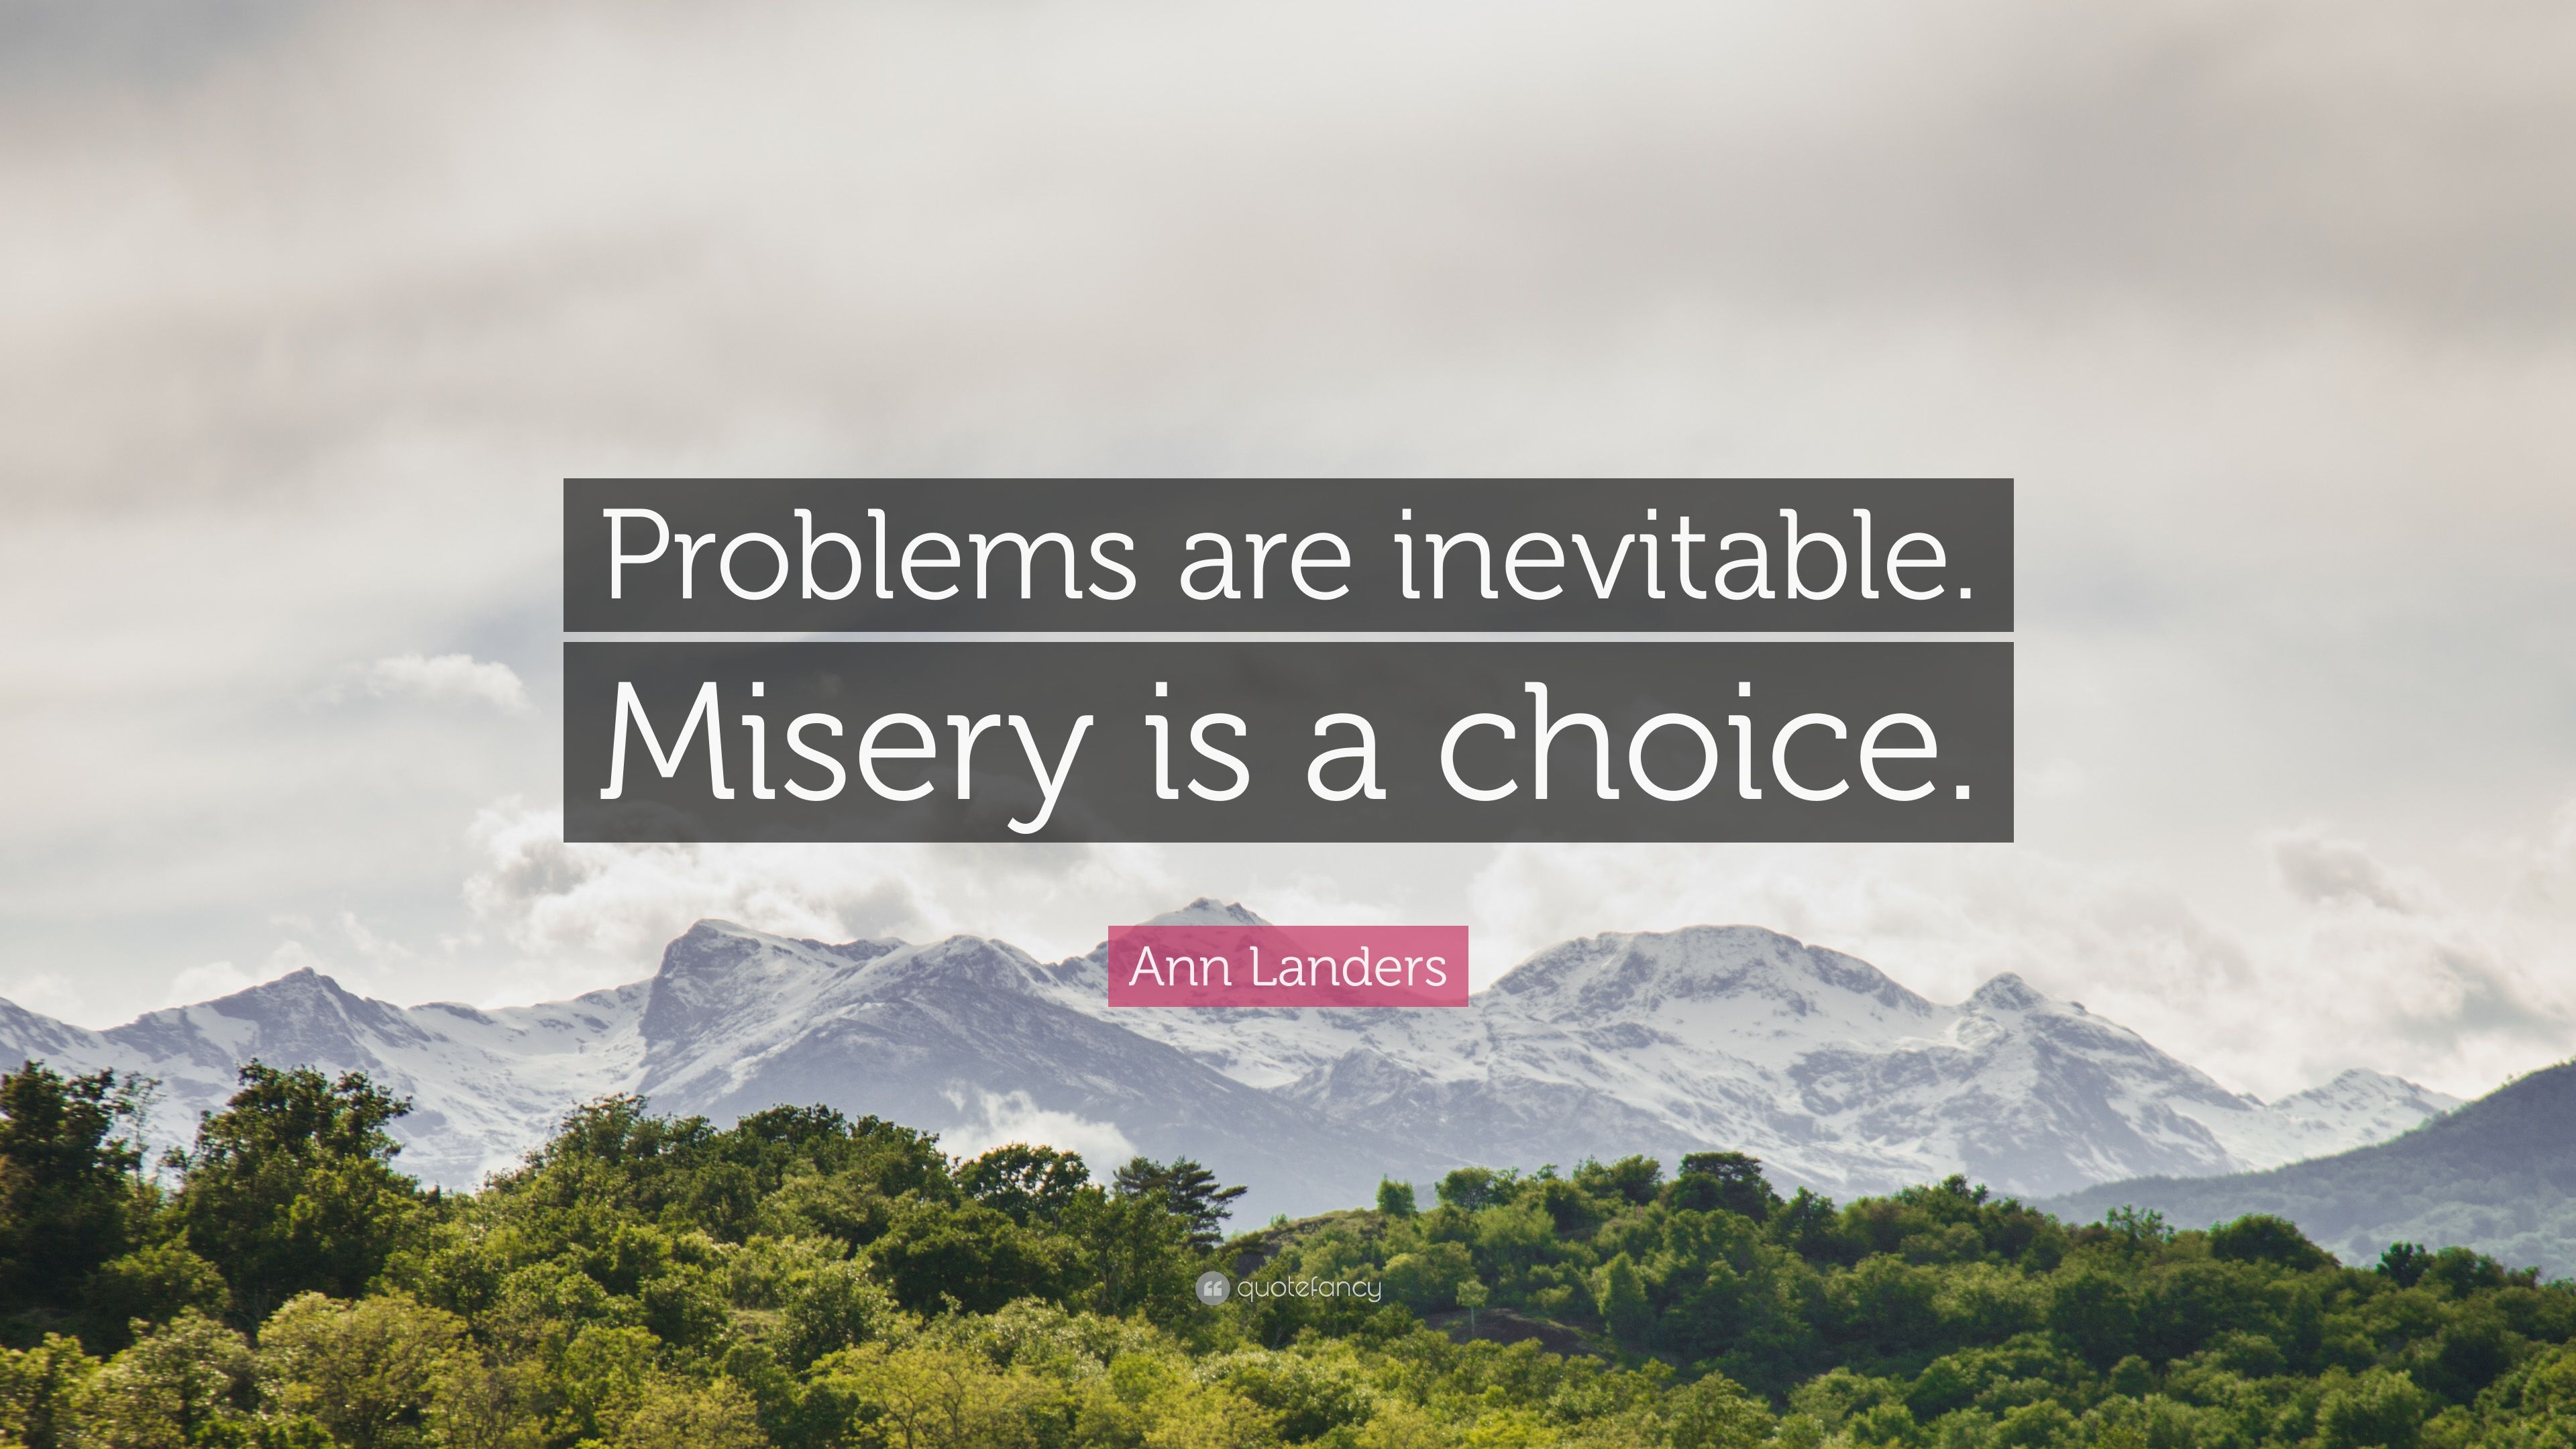 Ann Landers Quote: “Problems are inevitable. Misery is a choice